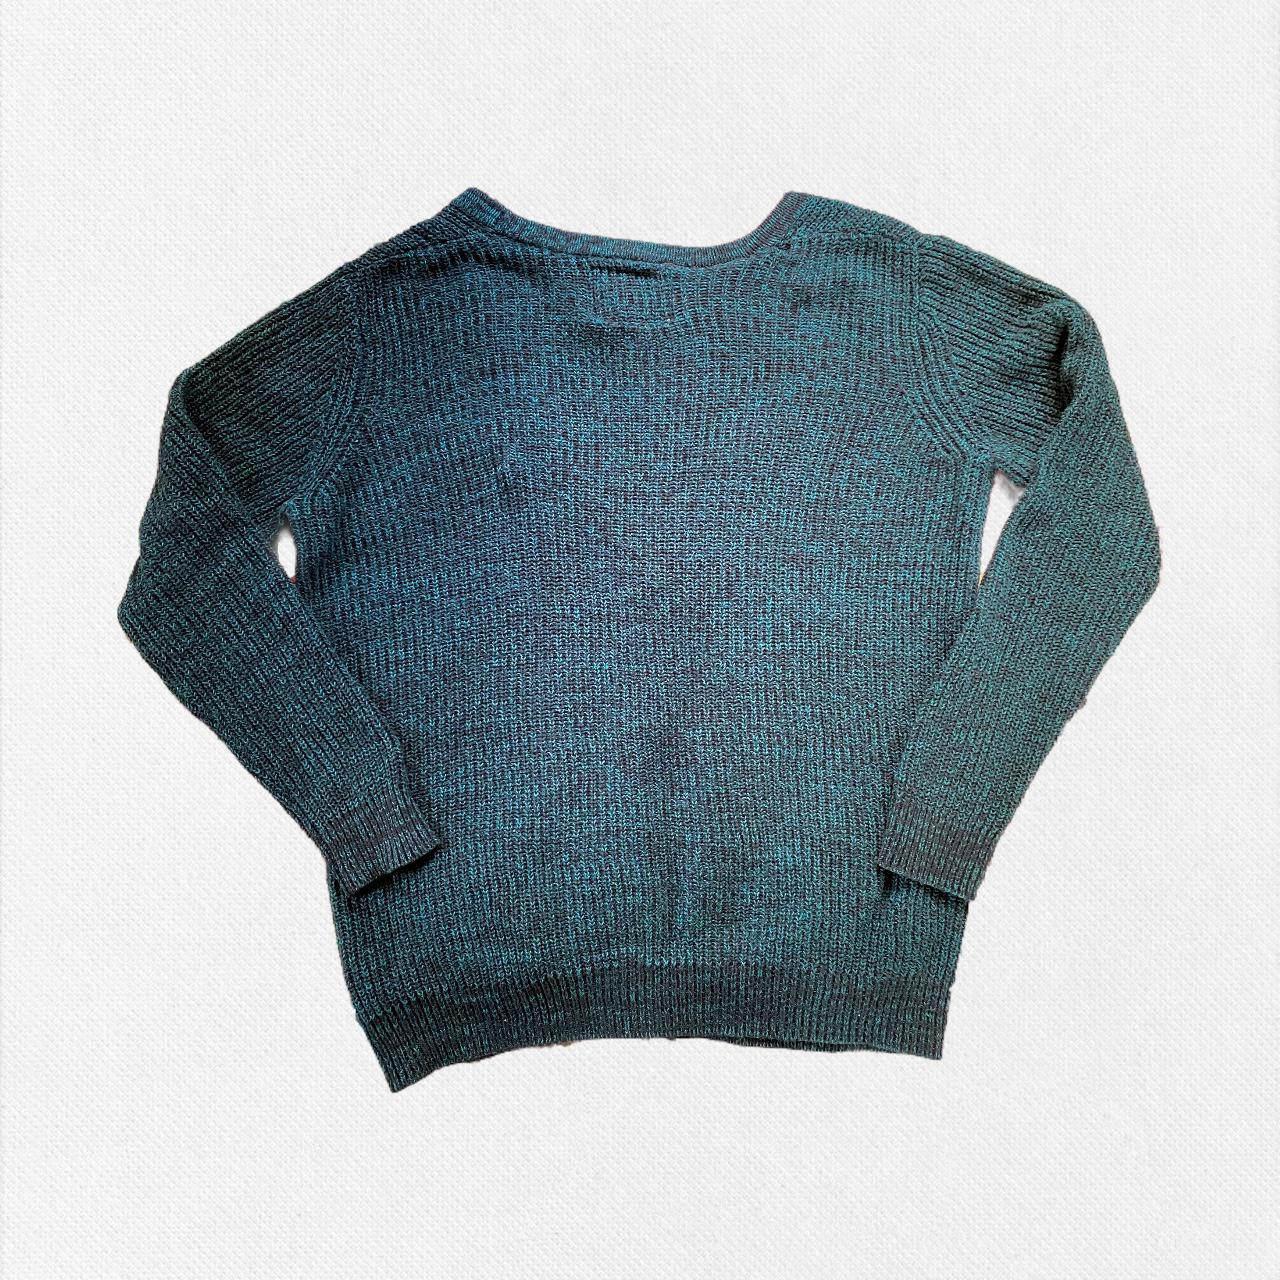 Product Image 2 - black and teal knit grandpa